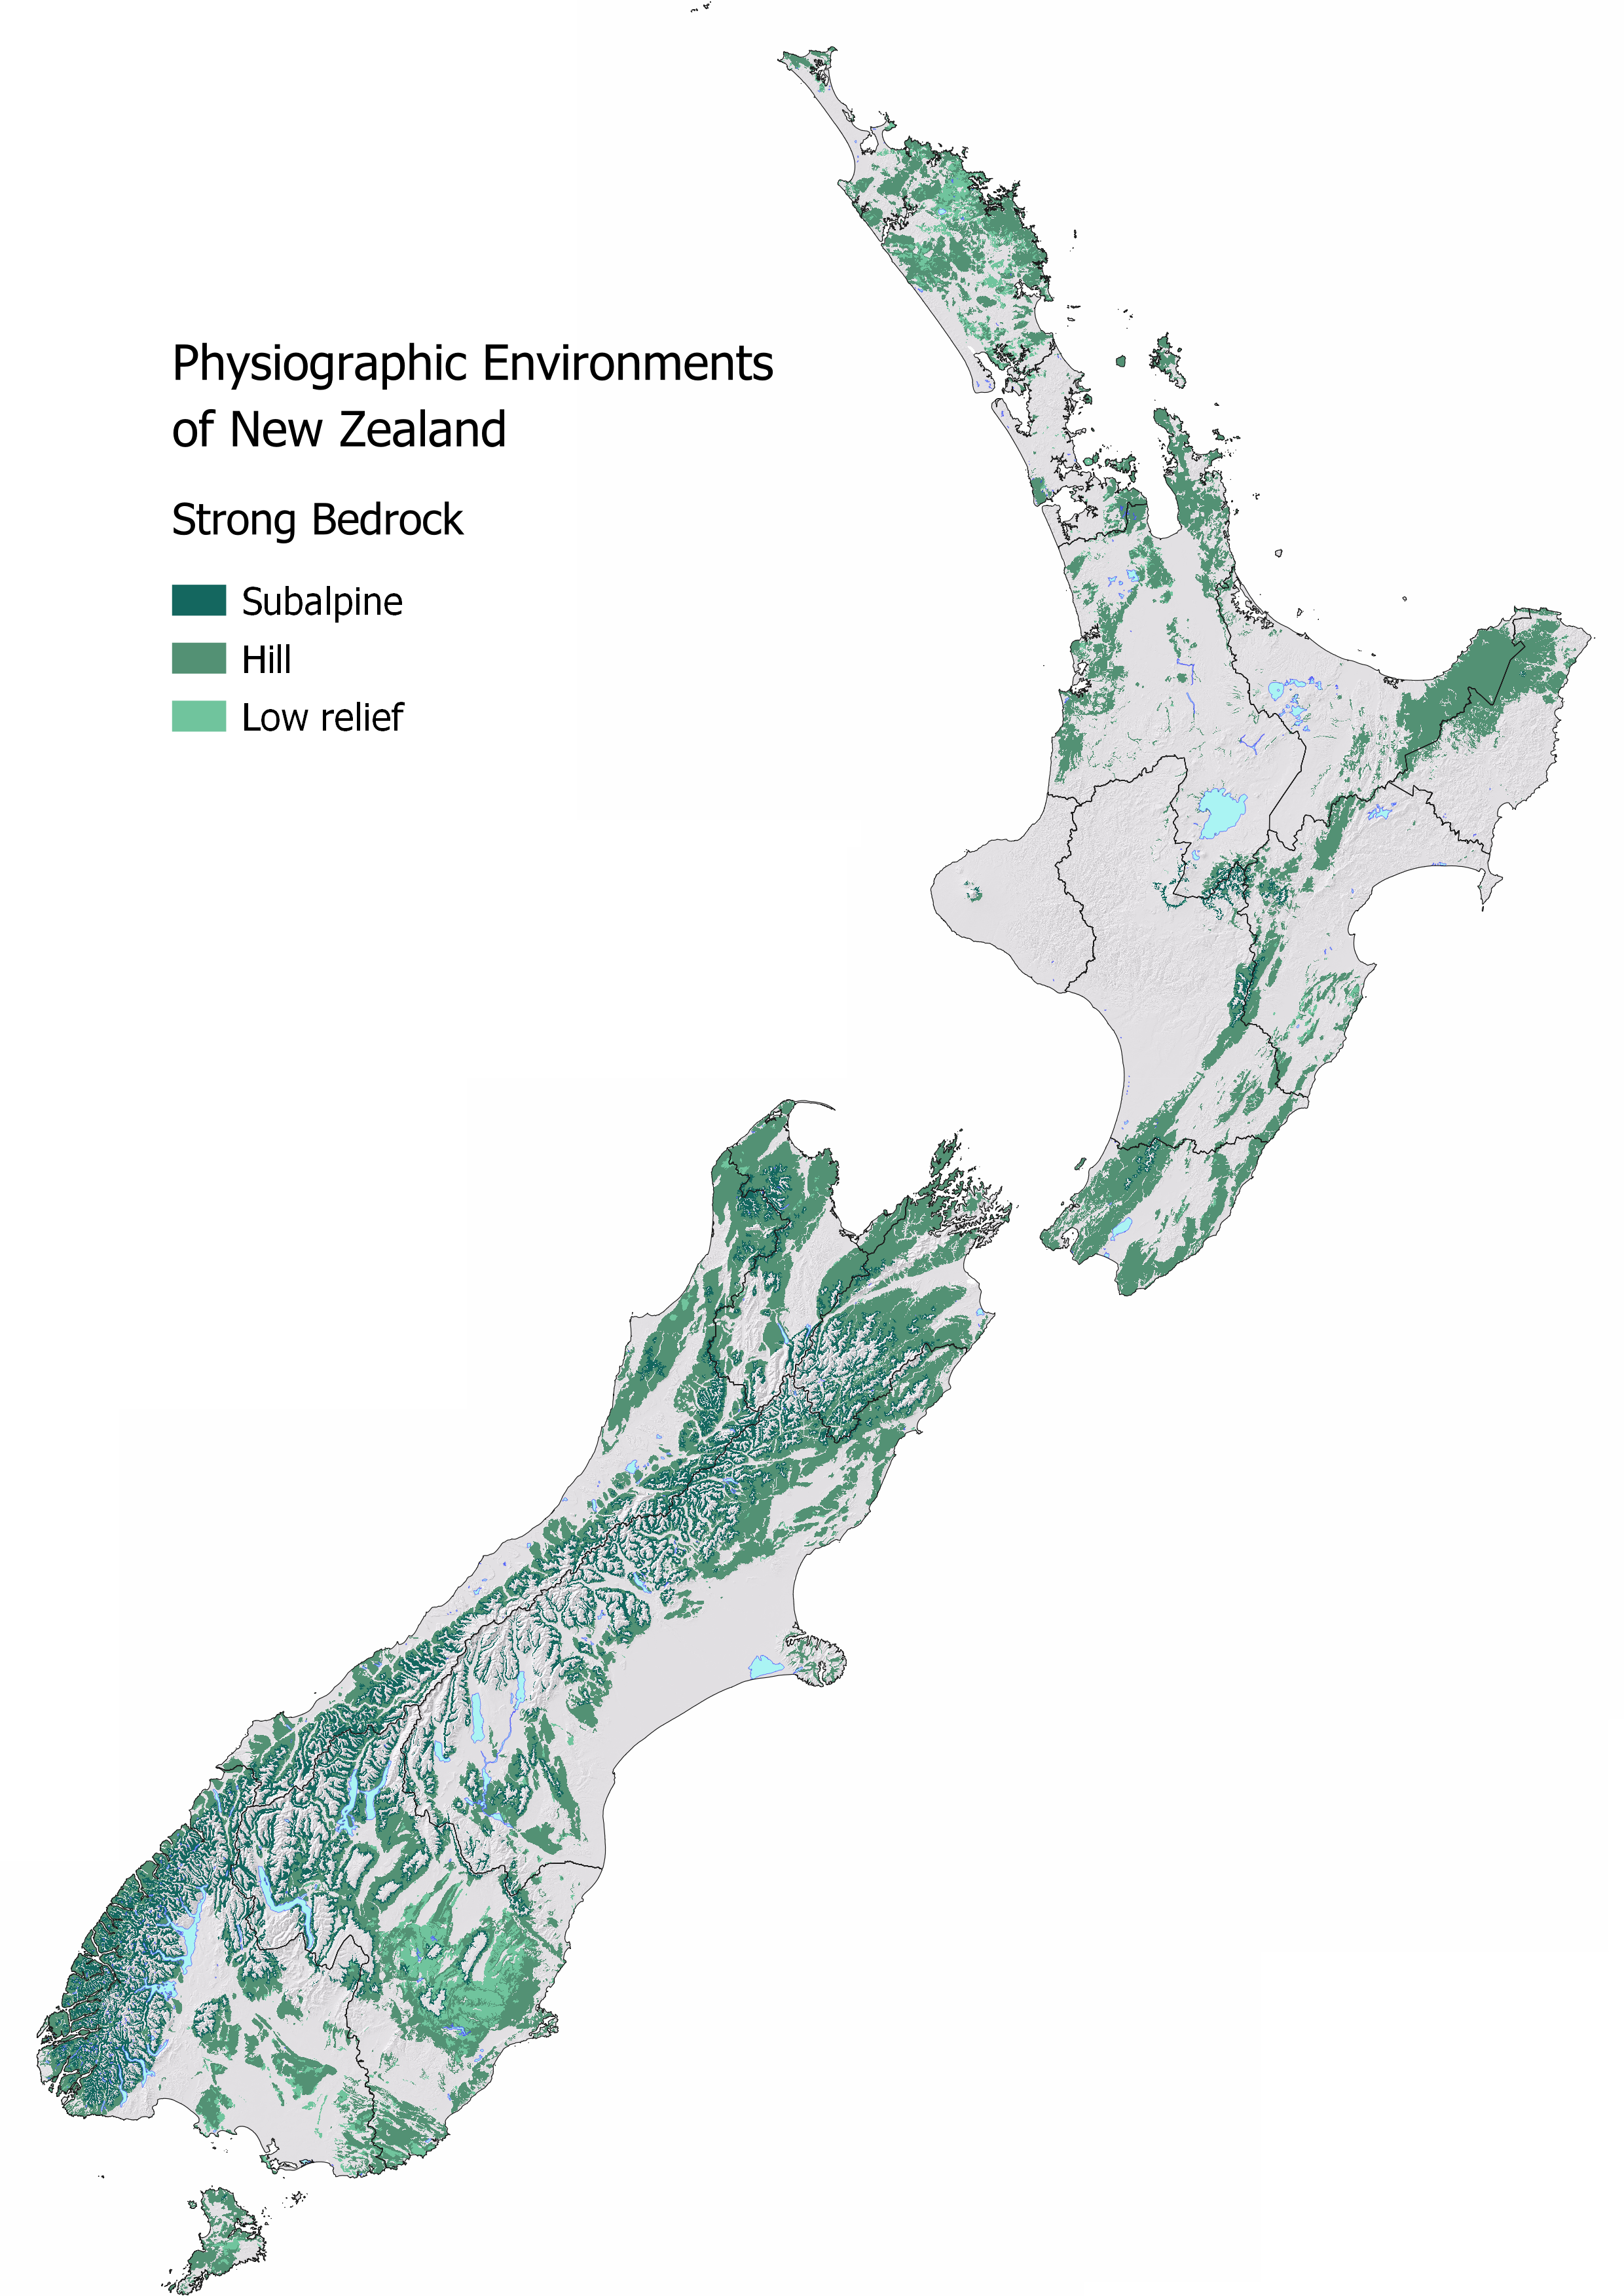 slope map of new zealand with the parts classified as 'Strong Bedrock' showing.